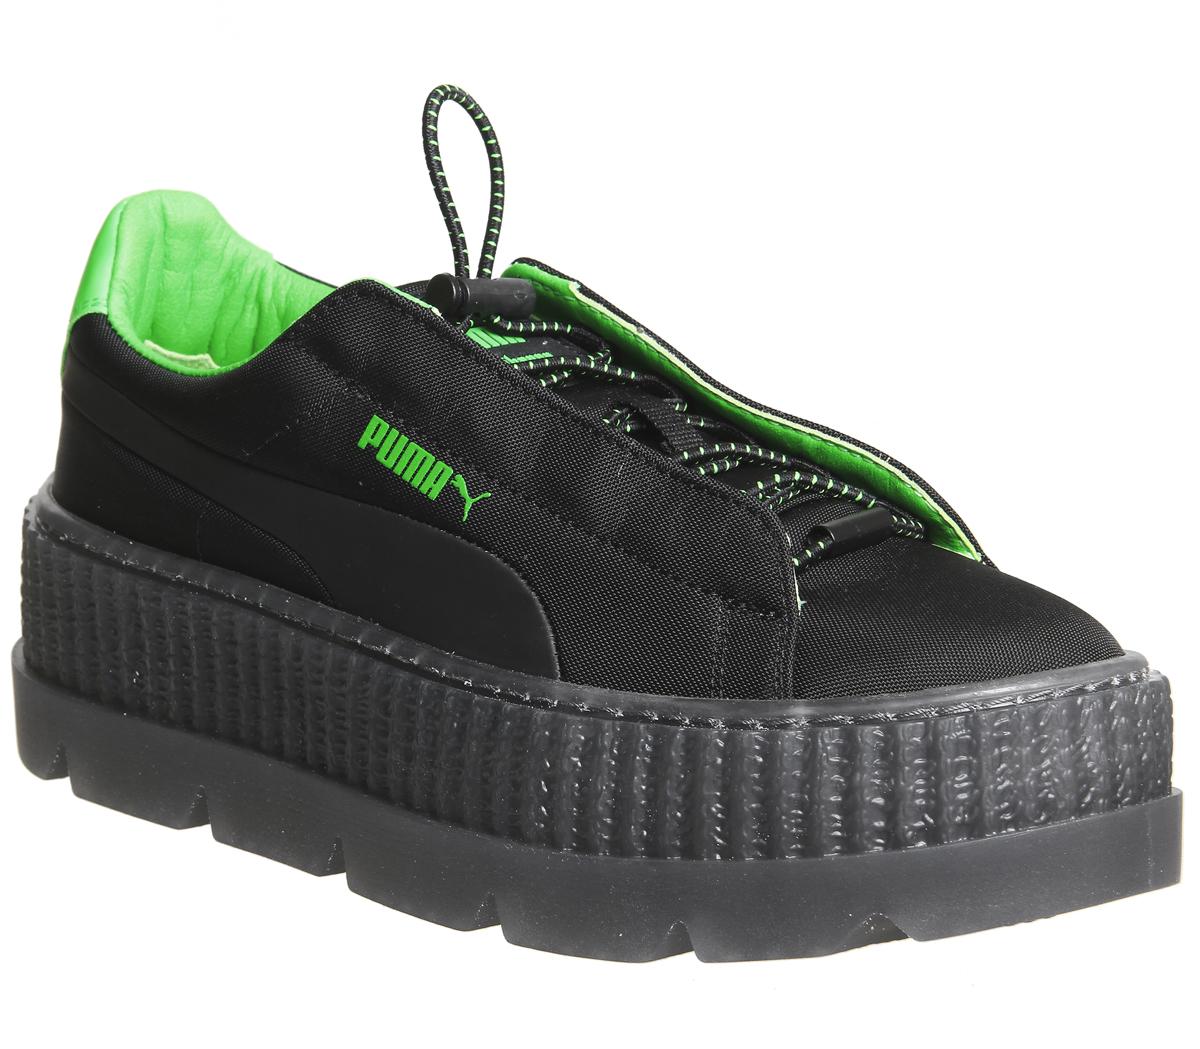 Puma Fenty Cleated Creepers Surf Black Green Hers Trainers